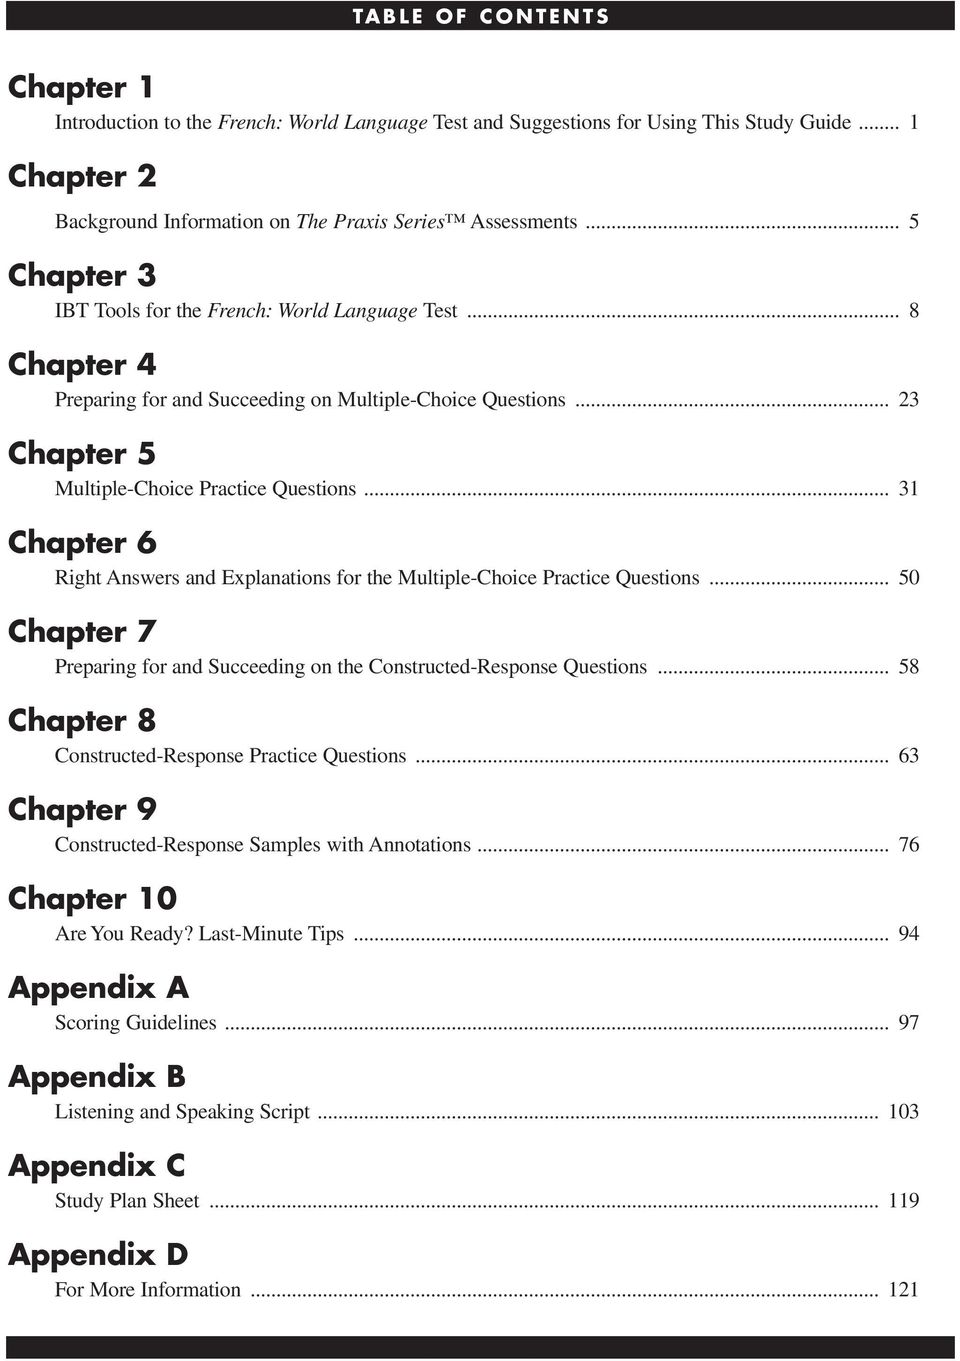 .. 31 Chapter 6 Right Answers and Explanations for the Multiple-Choice Practice Questions... 50 Chapter 7 Preparing for and Succeeding on the Constructed-Response Questions.